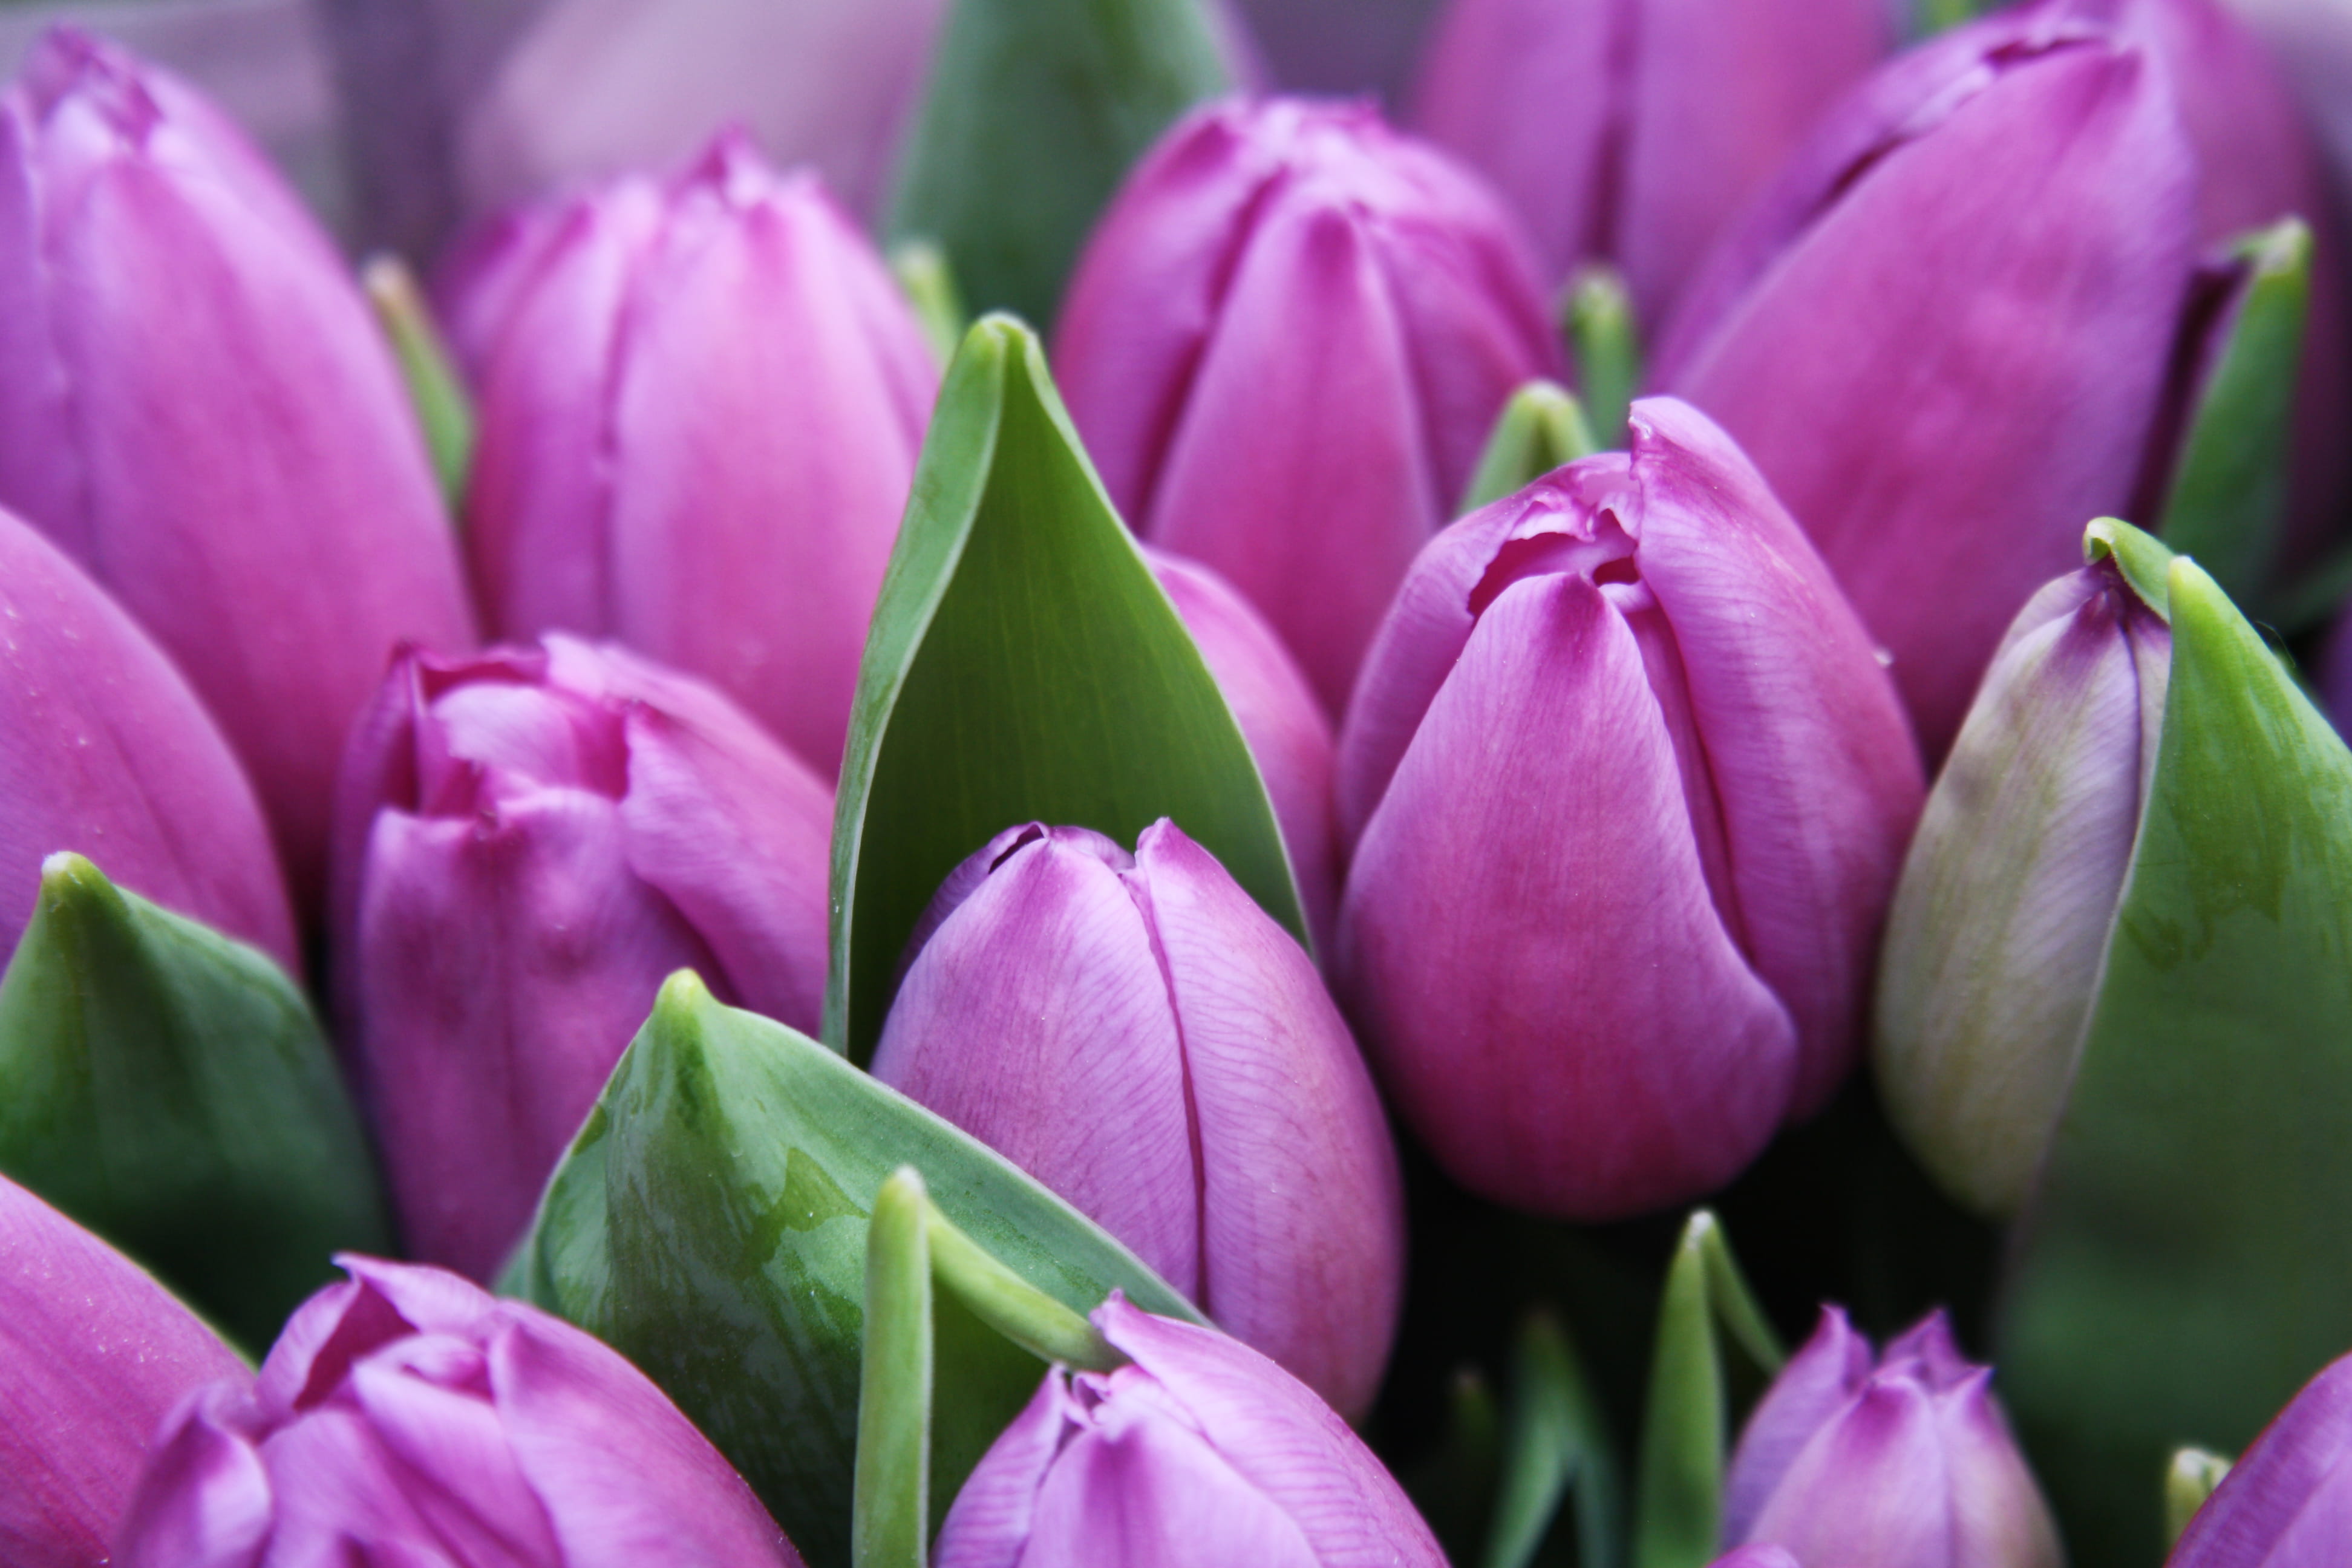 close-up photography of purple tulip flowers, macro-photography of pink tulip buds